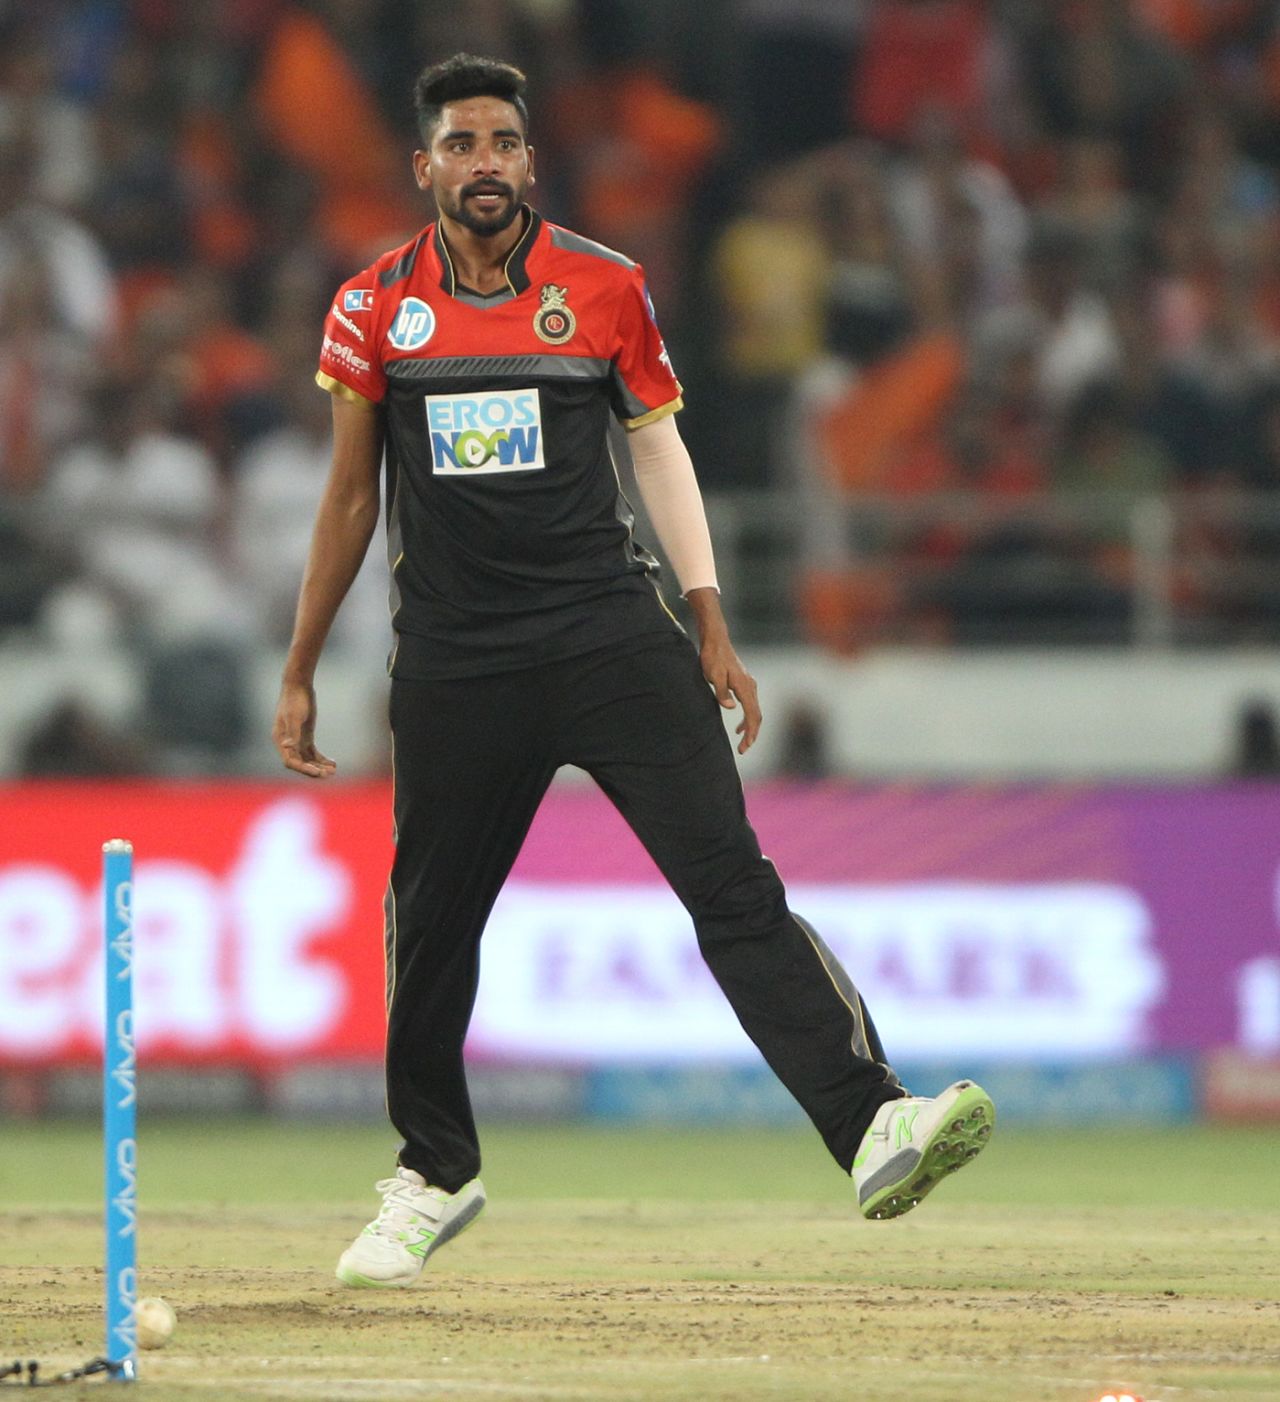 Mohammed Siraj reacts after dismantling the stumps, Sunrisers Hyderabad v Royal Challengers Bangalore, Hyderabad, IPL 2018, May 7, 2018